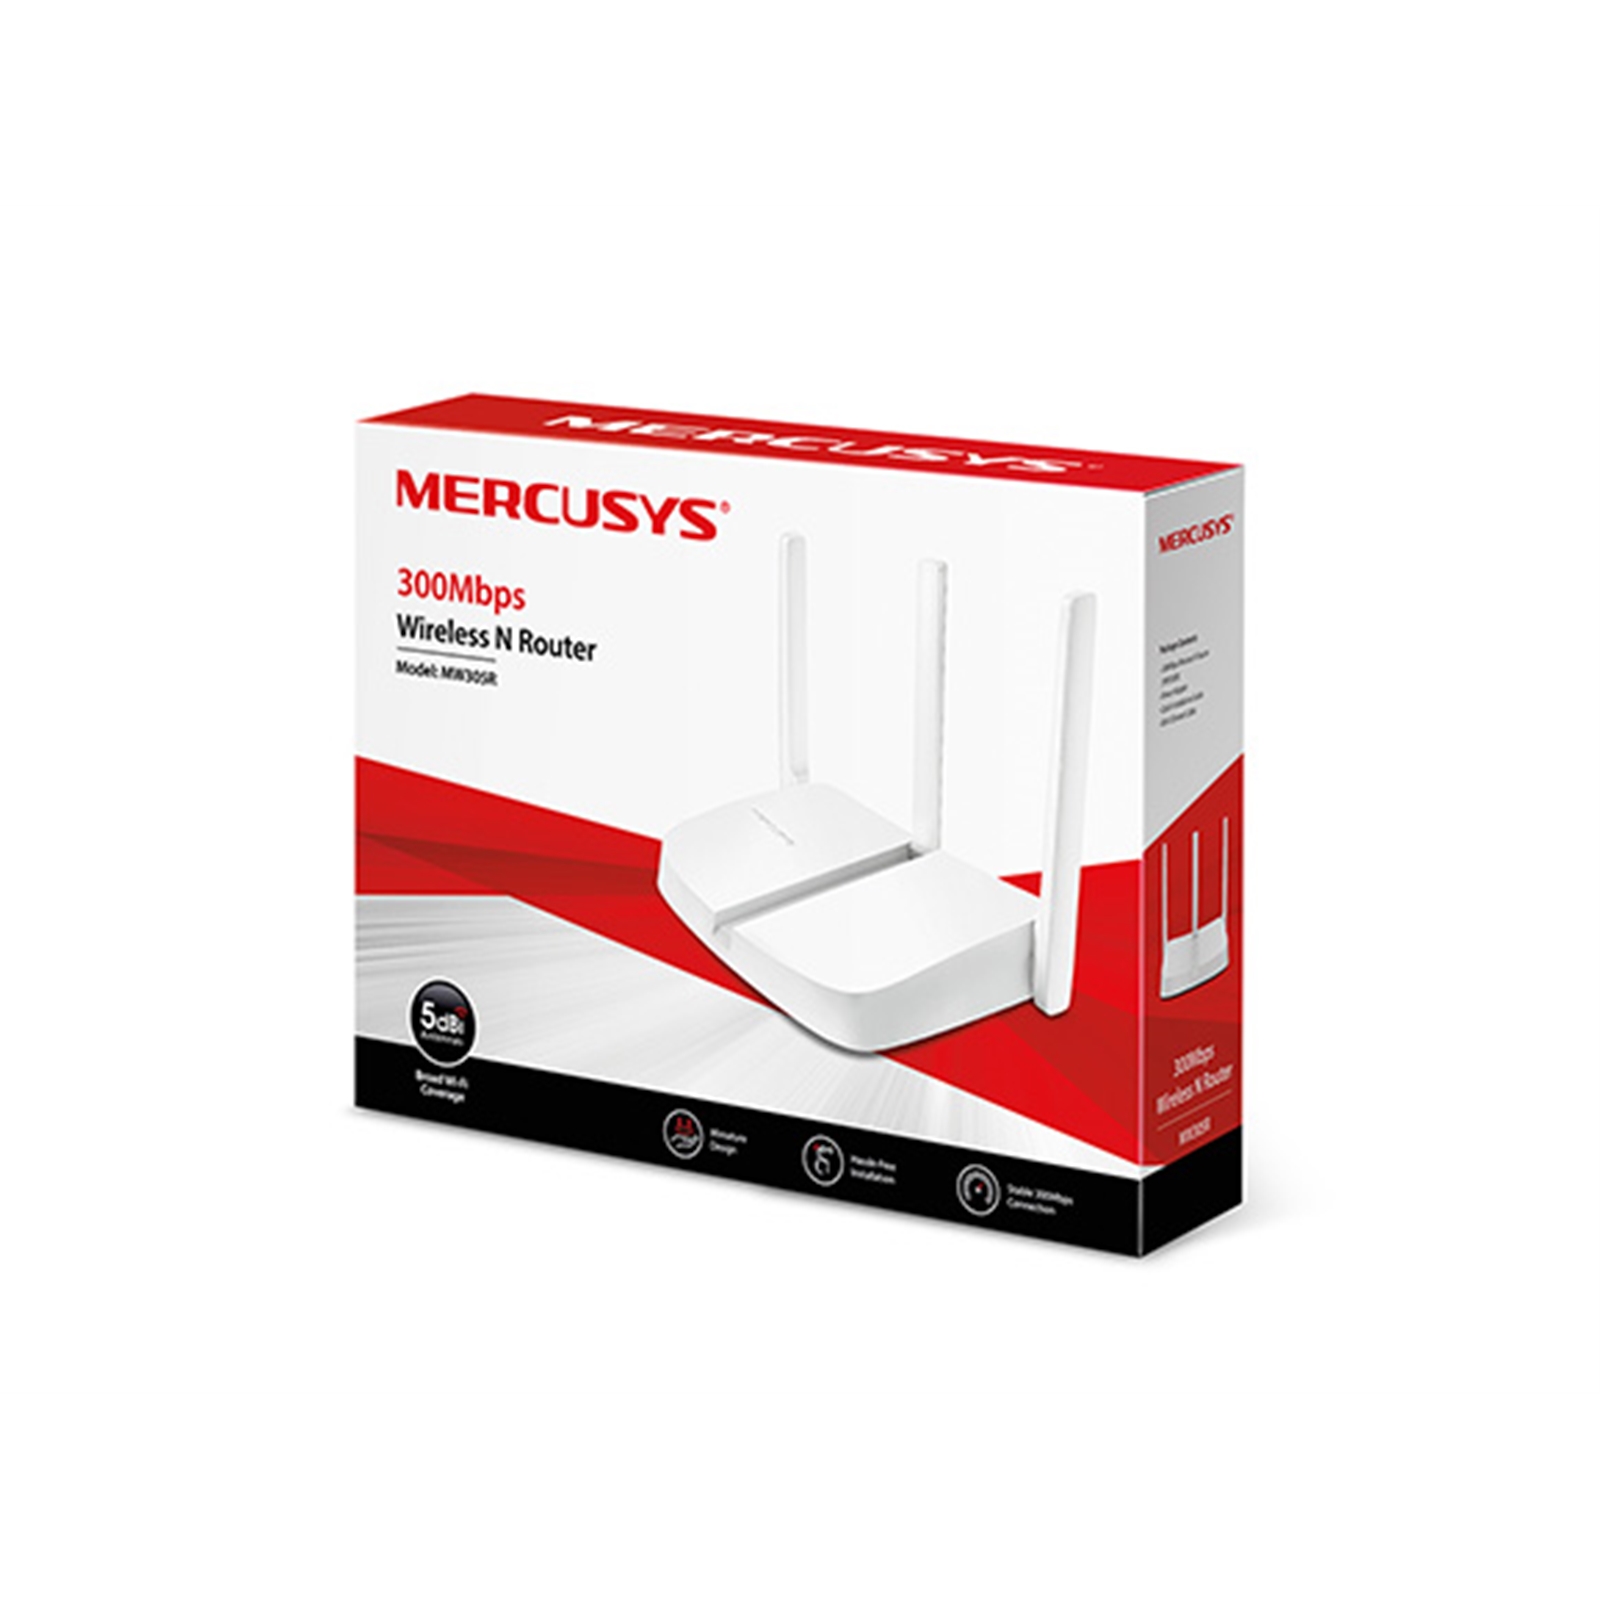 Mercusys MW305R 300Mbps Wireless N Cable Router